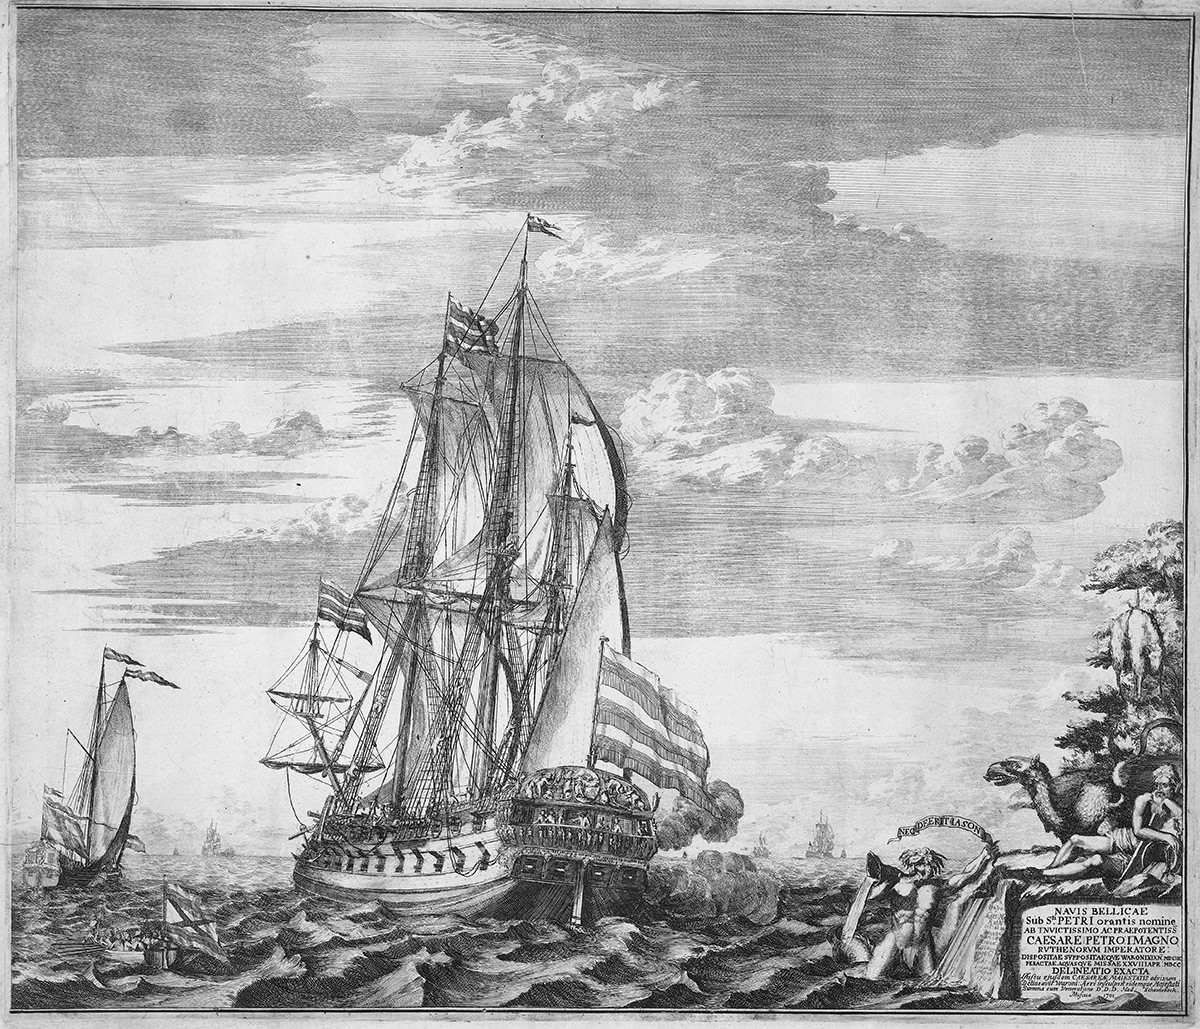 Flagship 'Goto Predestinatsia' (The Providence of God) built by Peter the Great at Voronezh, 1700, 1701. Found in the collection of Rijksmuseum, Amsterdam. Artist : Schoonebeek (Schoonebeck), Adriaan (1661-1705). 